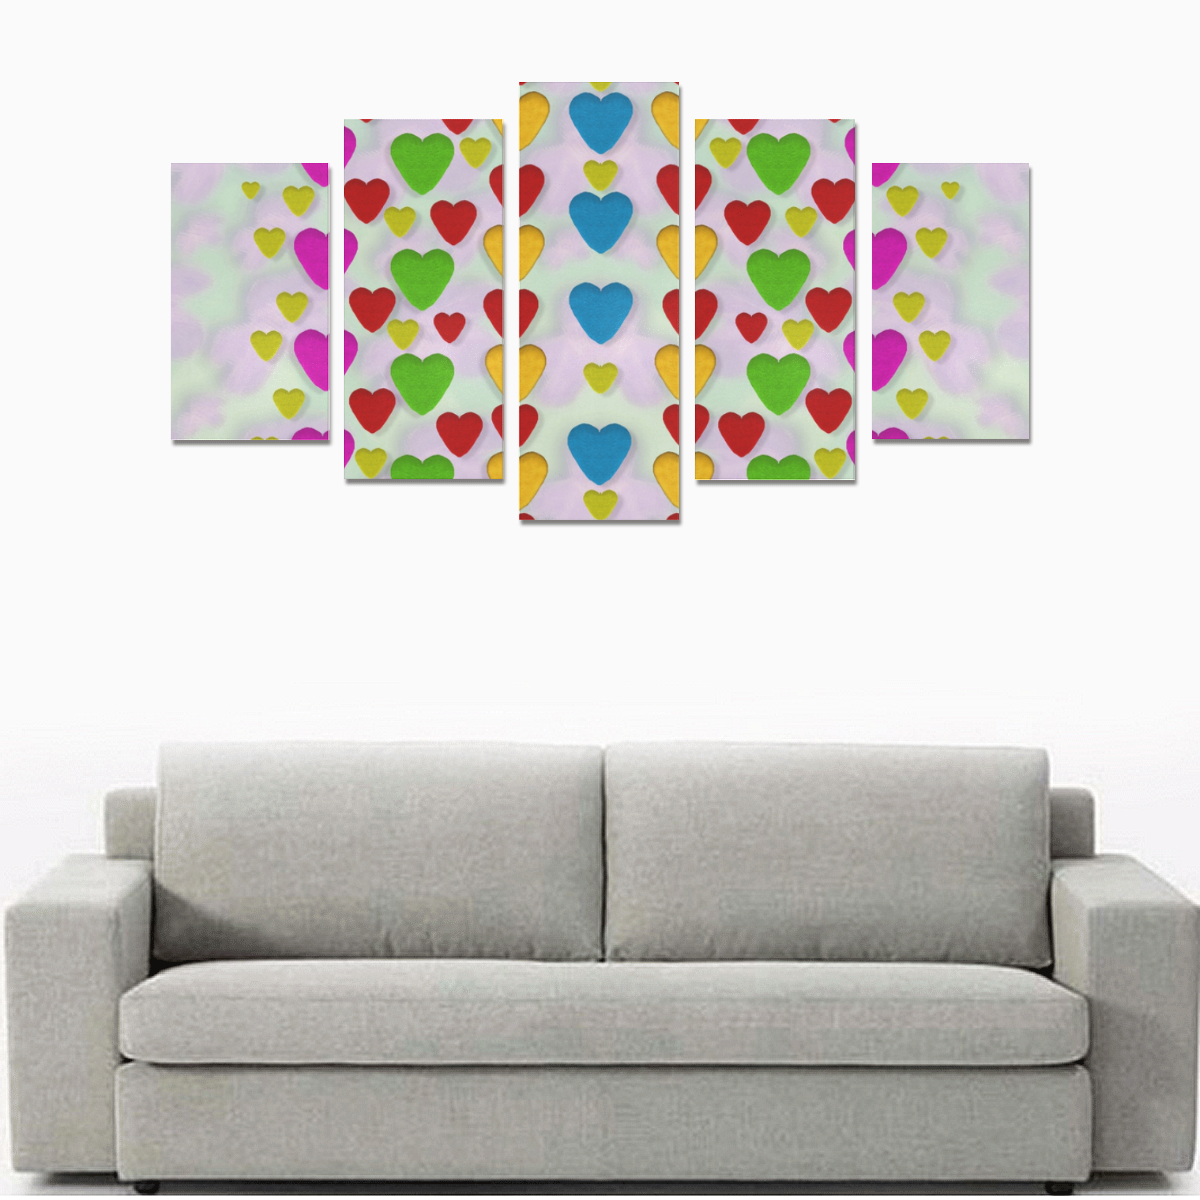 So sweet and hearty as love can be Canvas Print Sets A (No Frame)